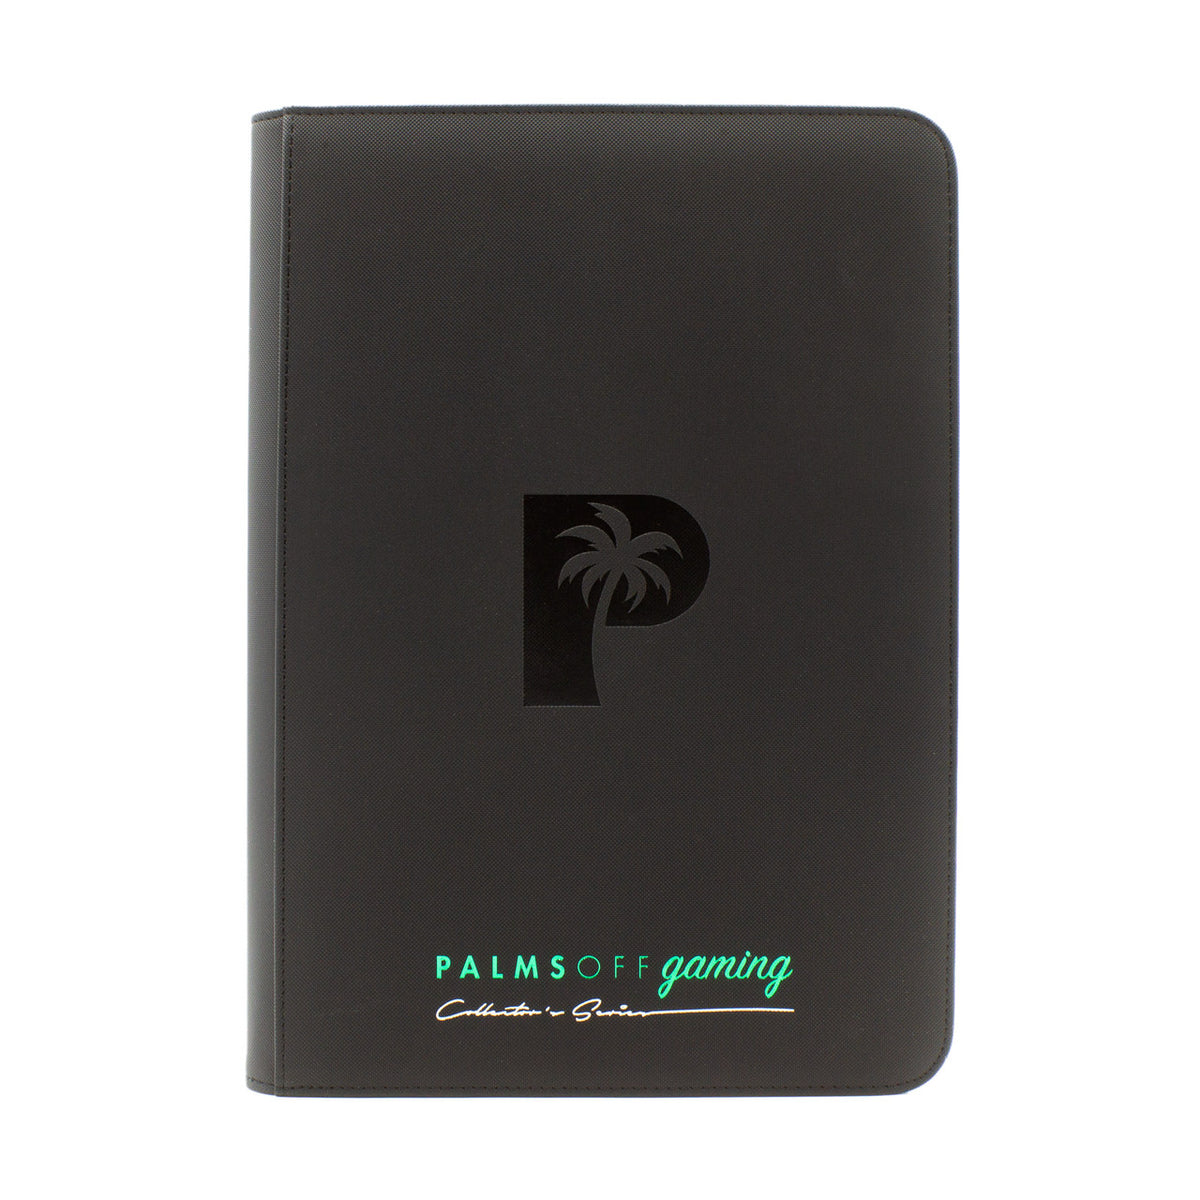 Palms Off Gaming - Limited Edition 9 Pocket Zip Trading Card Binder